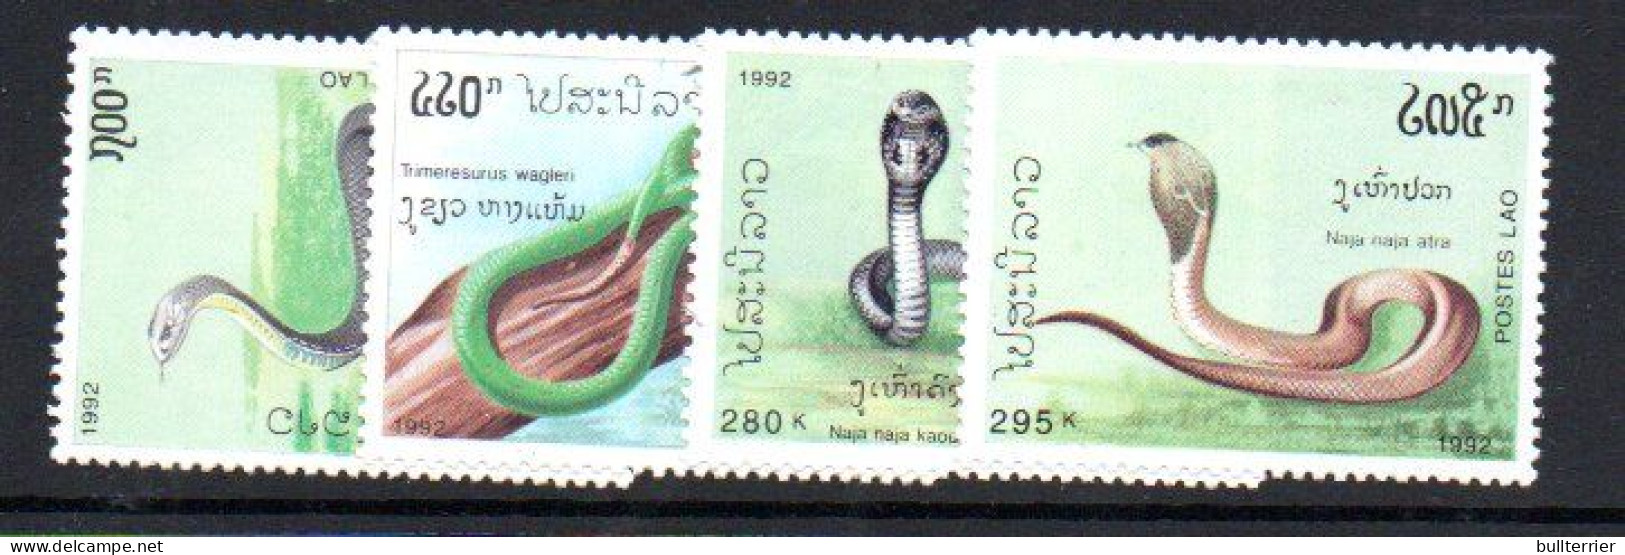 LAOS - 1992 -  SNAKES SET OF 4 MINT NEVER HINGED - Laos